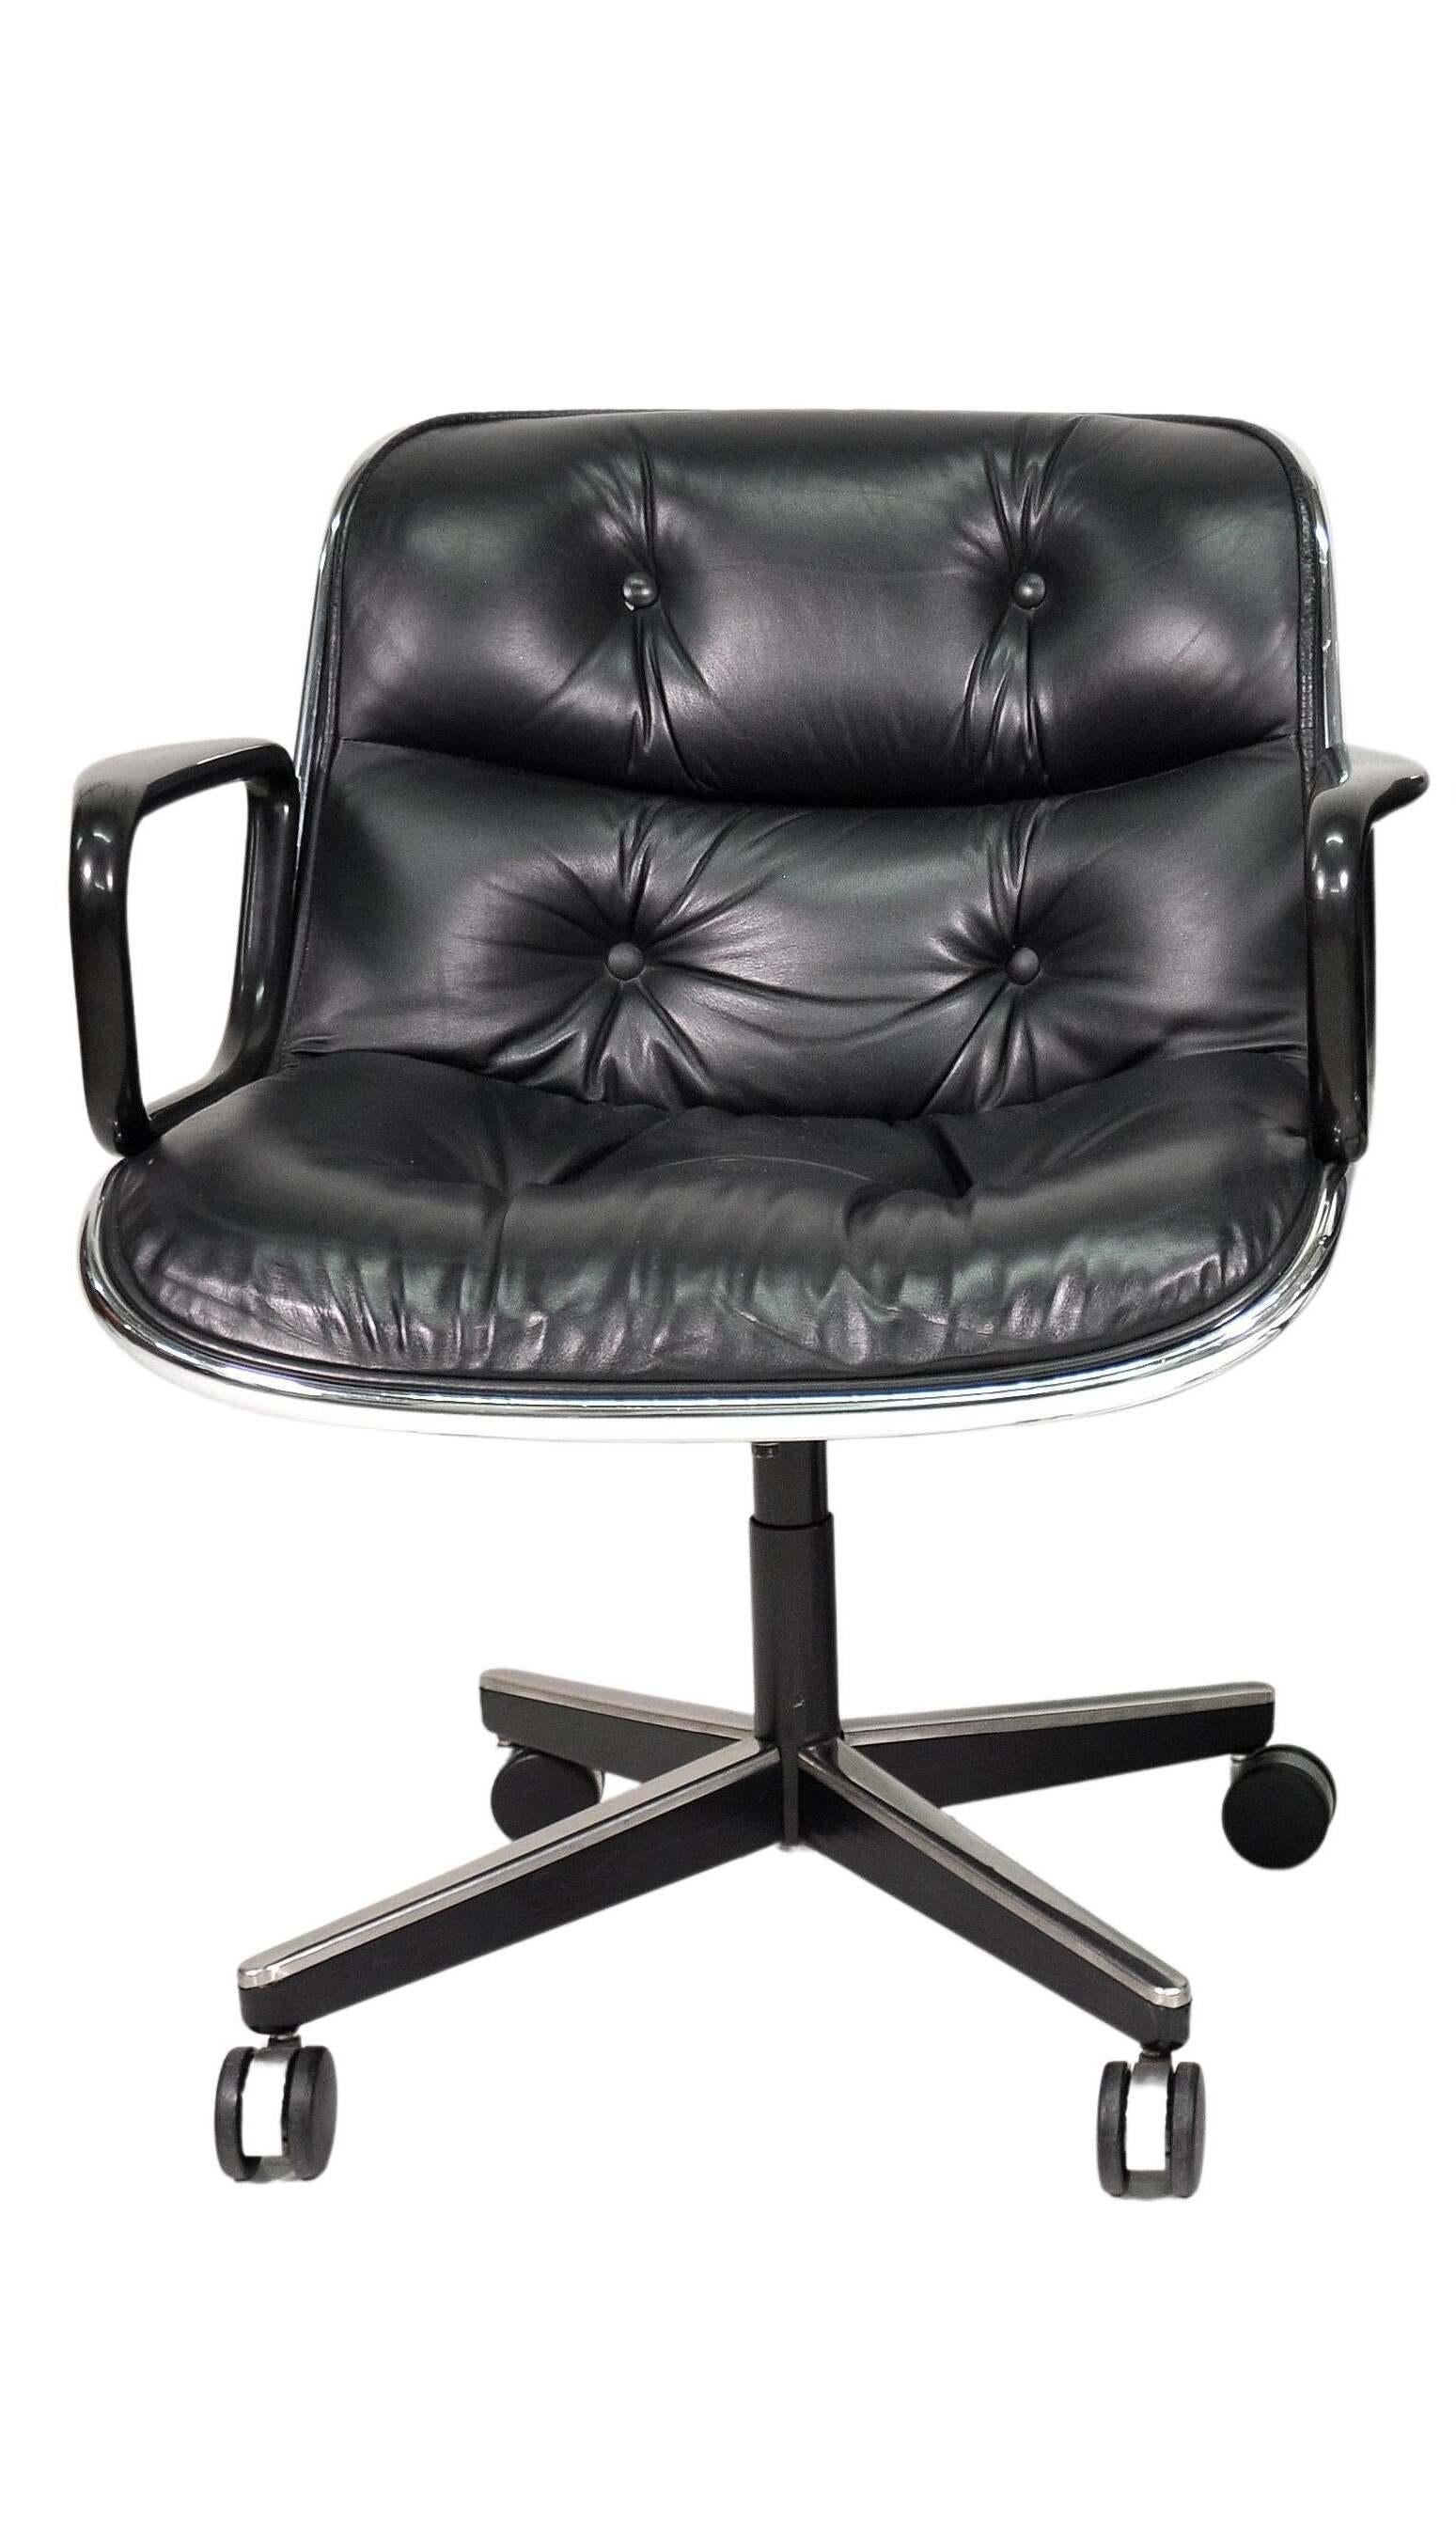 Late 20th Century Black Leather Rolling Office Chair by Charles Pollock for Knoll International